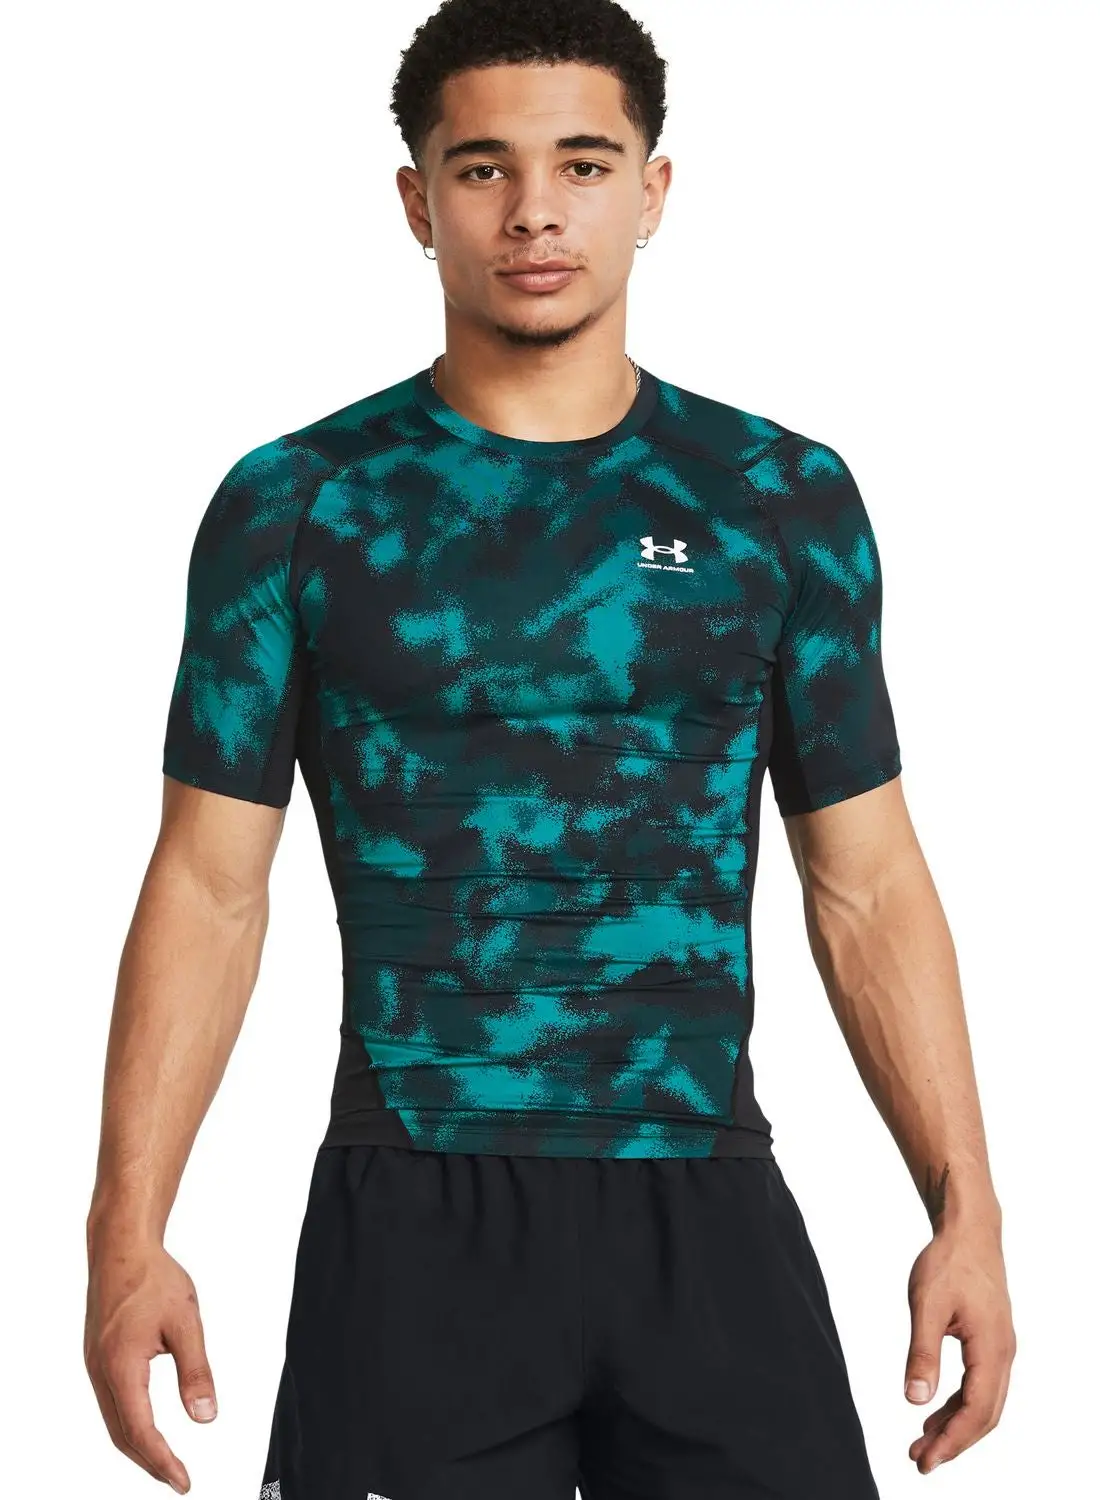 UNDER ARMOUR Heatgear Armour Printed Compression T-Shirt